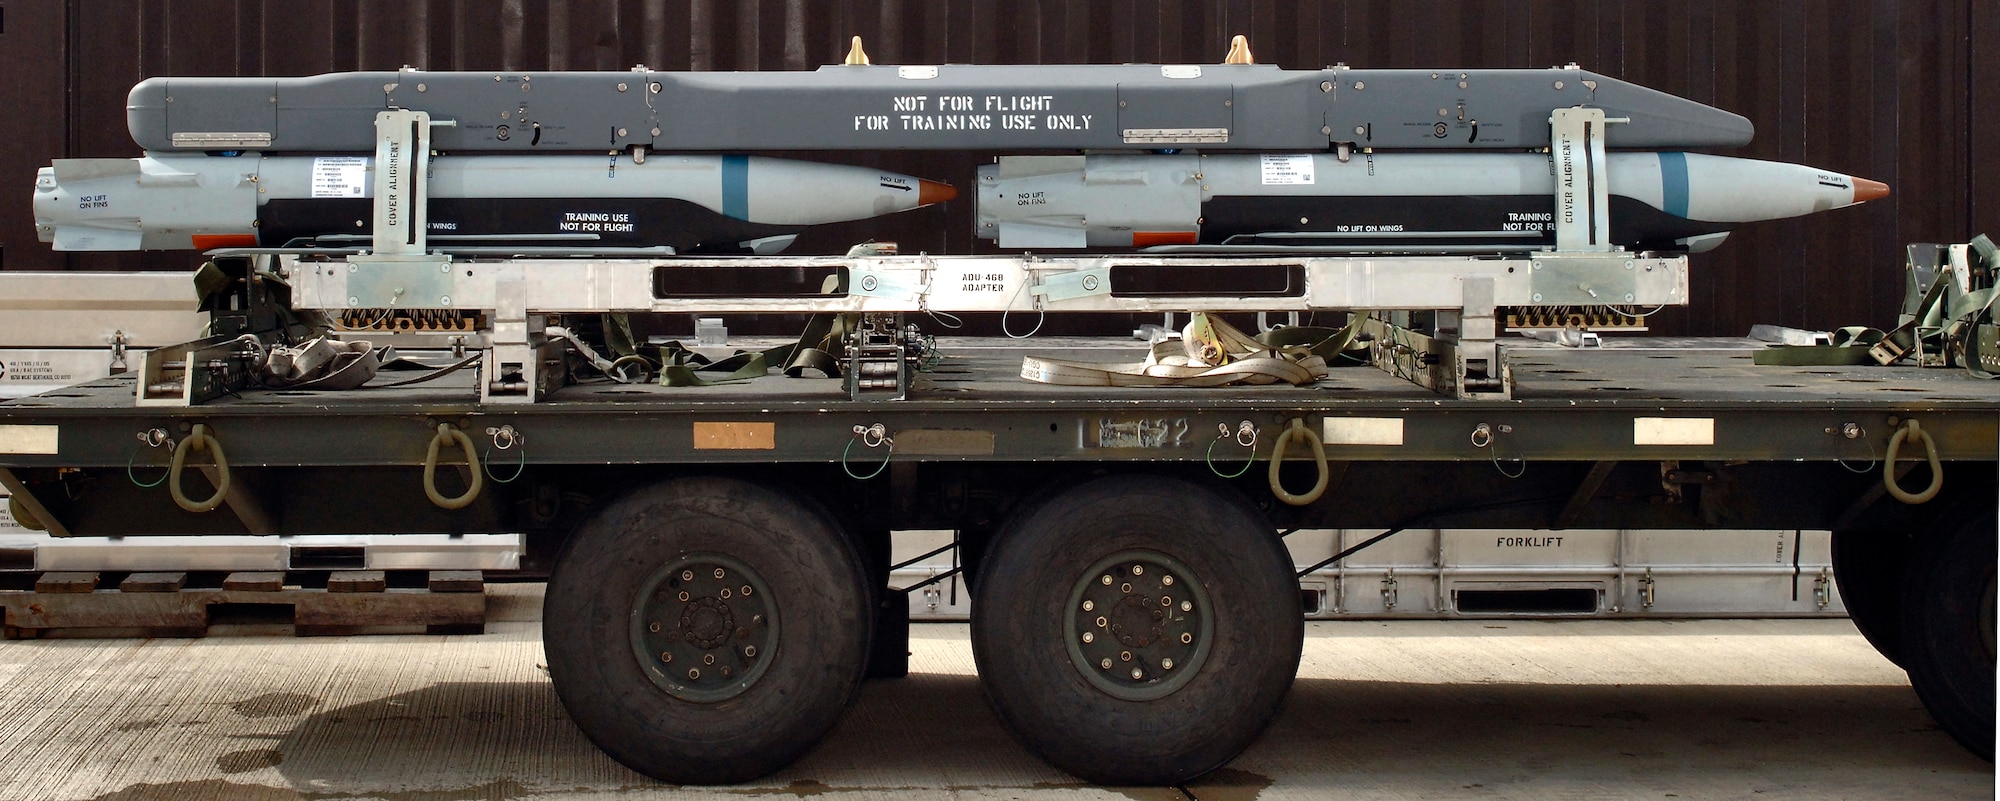 The Bomb Rack Unit 61 with carrier and four ground-training Guided Bomb Unit-39 small-diameter bombs on this munitions trailer undergoes testing at Royal Air Force Lakenheath, England, on Aug. 1. The 494th Fighter Wing will be the first unit to receive and use the bomb when it deploys to Southwest Asia later this year. (U.S. Air Force photo/Master Sgt. Lance Cheung) 